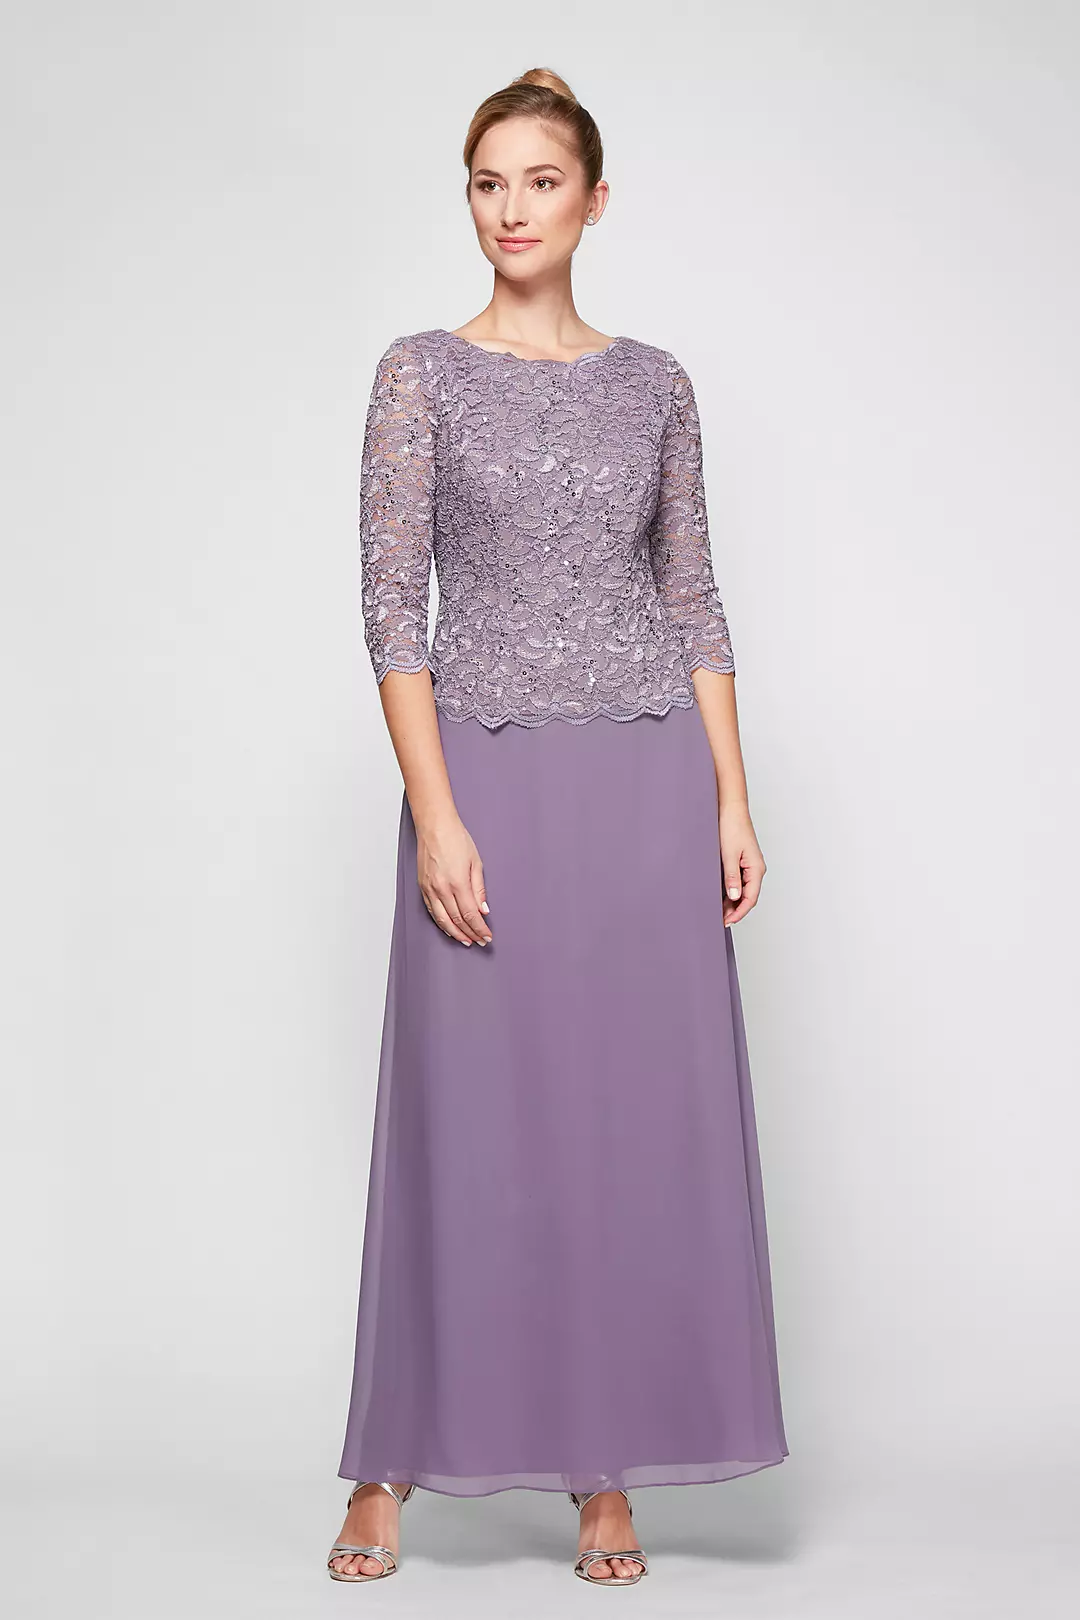 Lace and Chiffon A-Line Dress with Sheer Sleeves Image